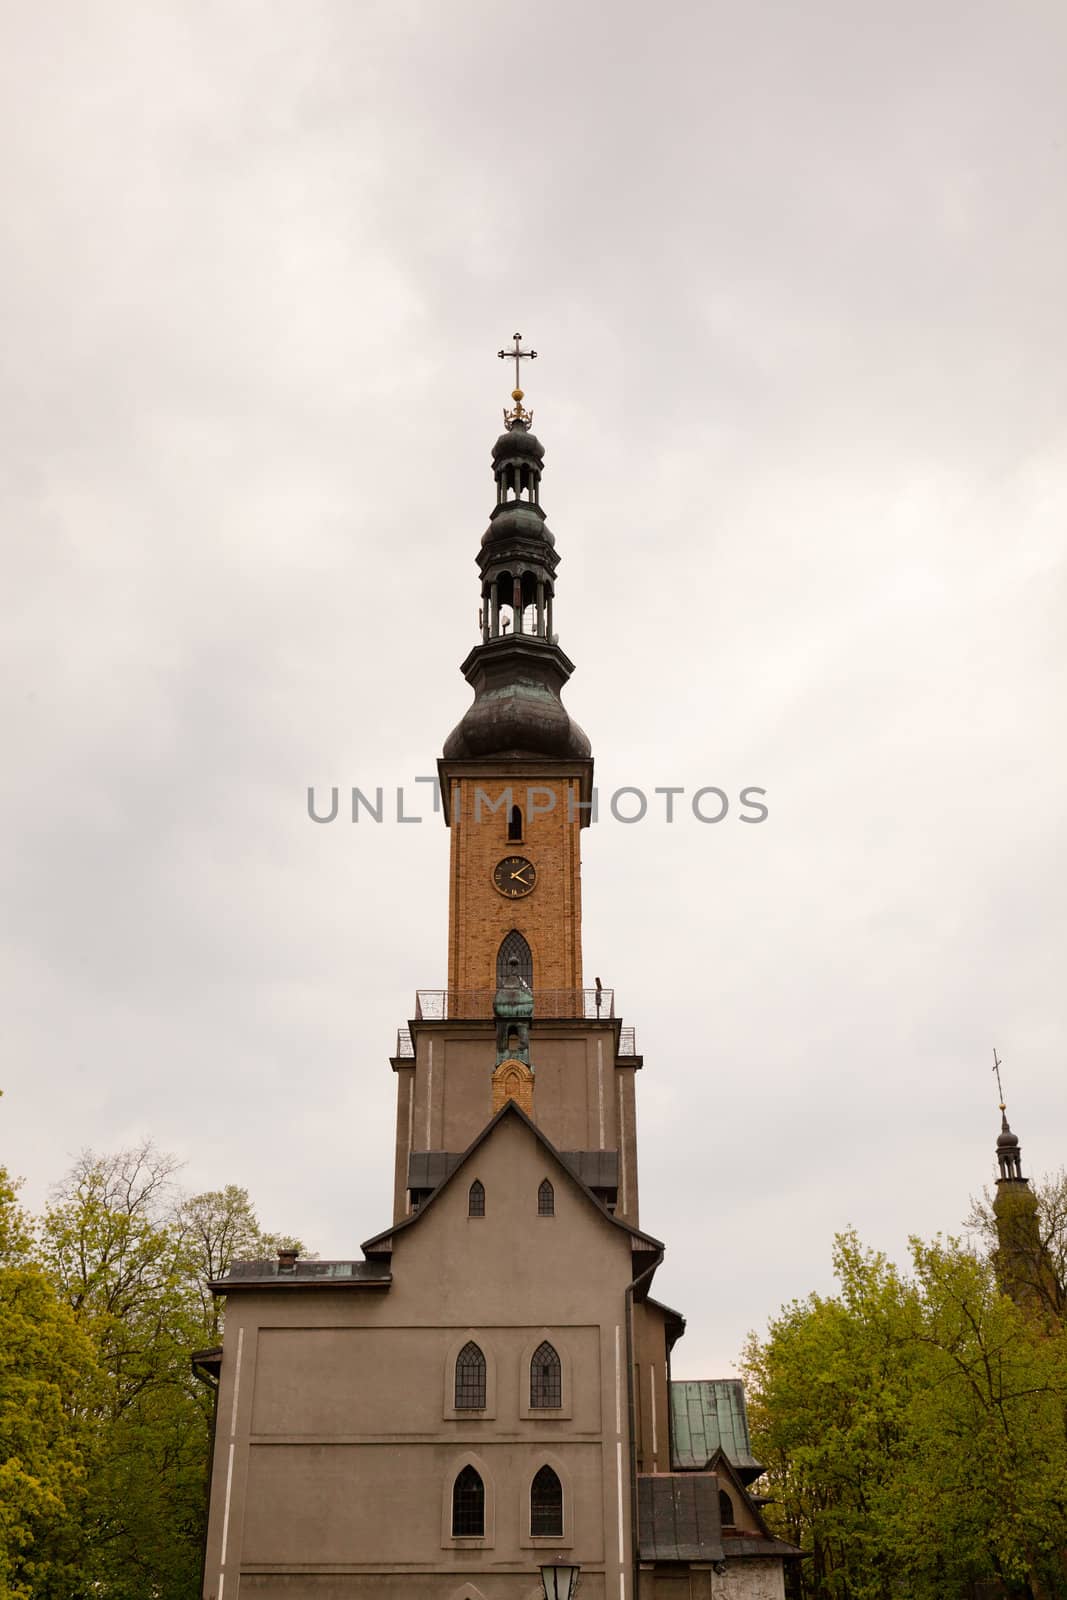 The Basilica of Our Lady of Licheń is a Roman Catholic church located in the village of Licheń Stary near Konin in the Greater Poland Voivodeship in Poland.